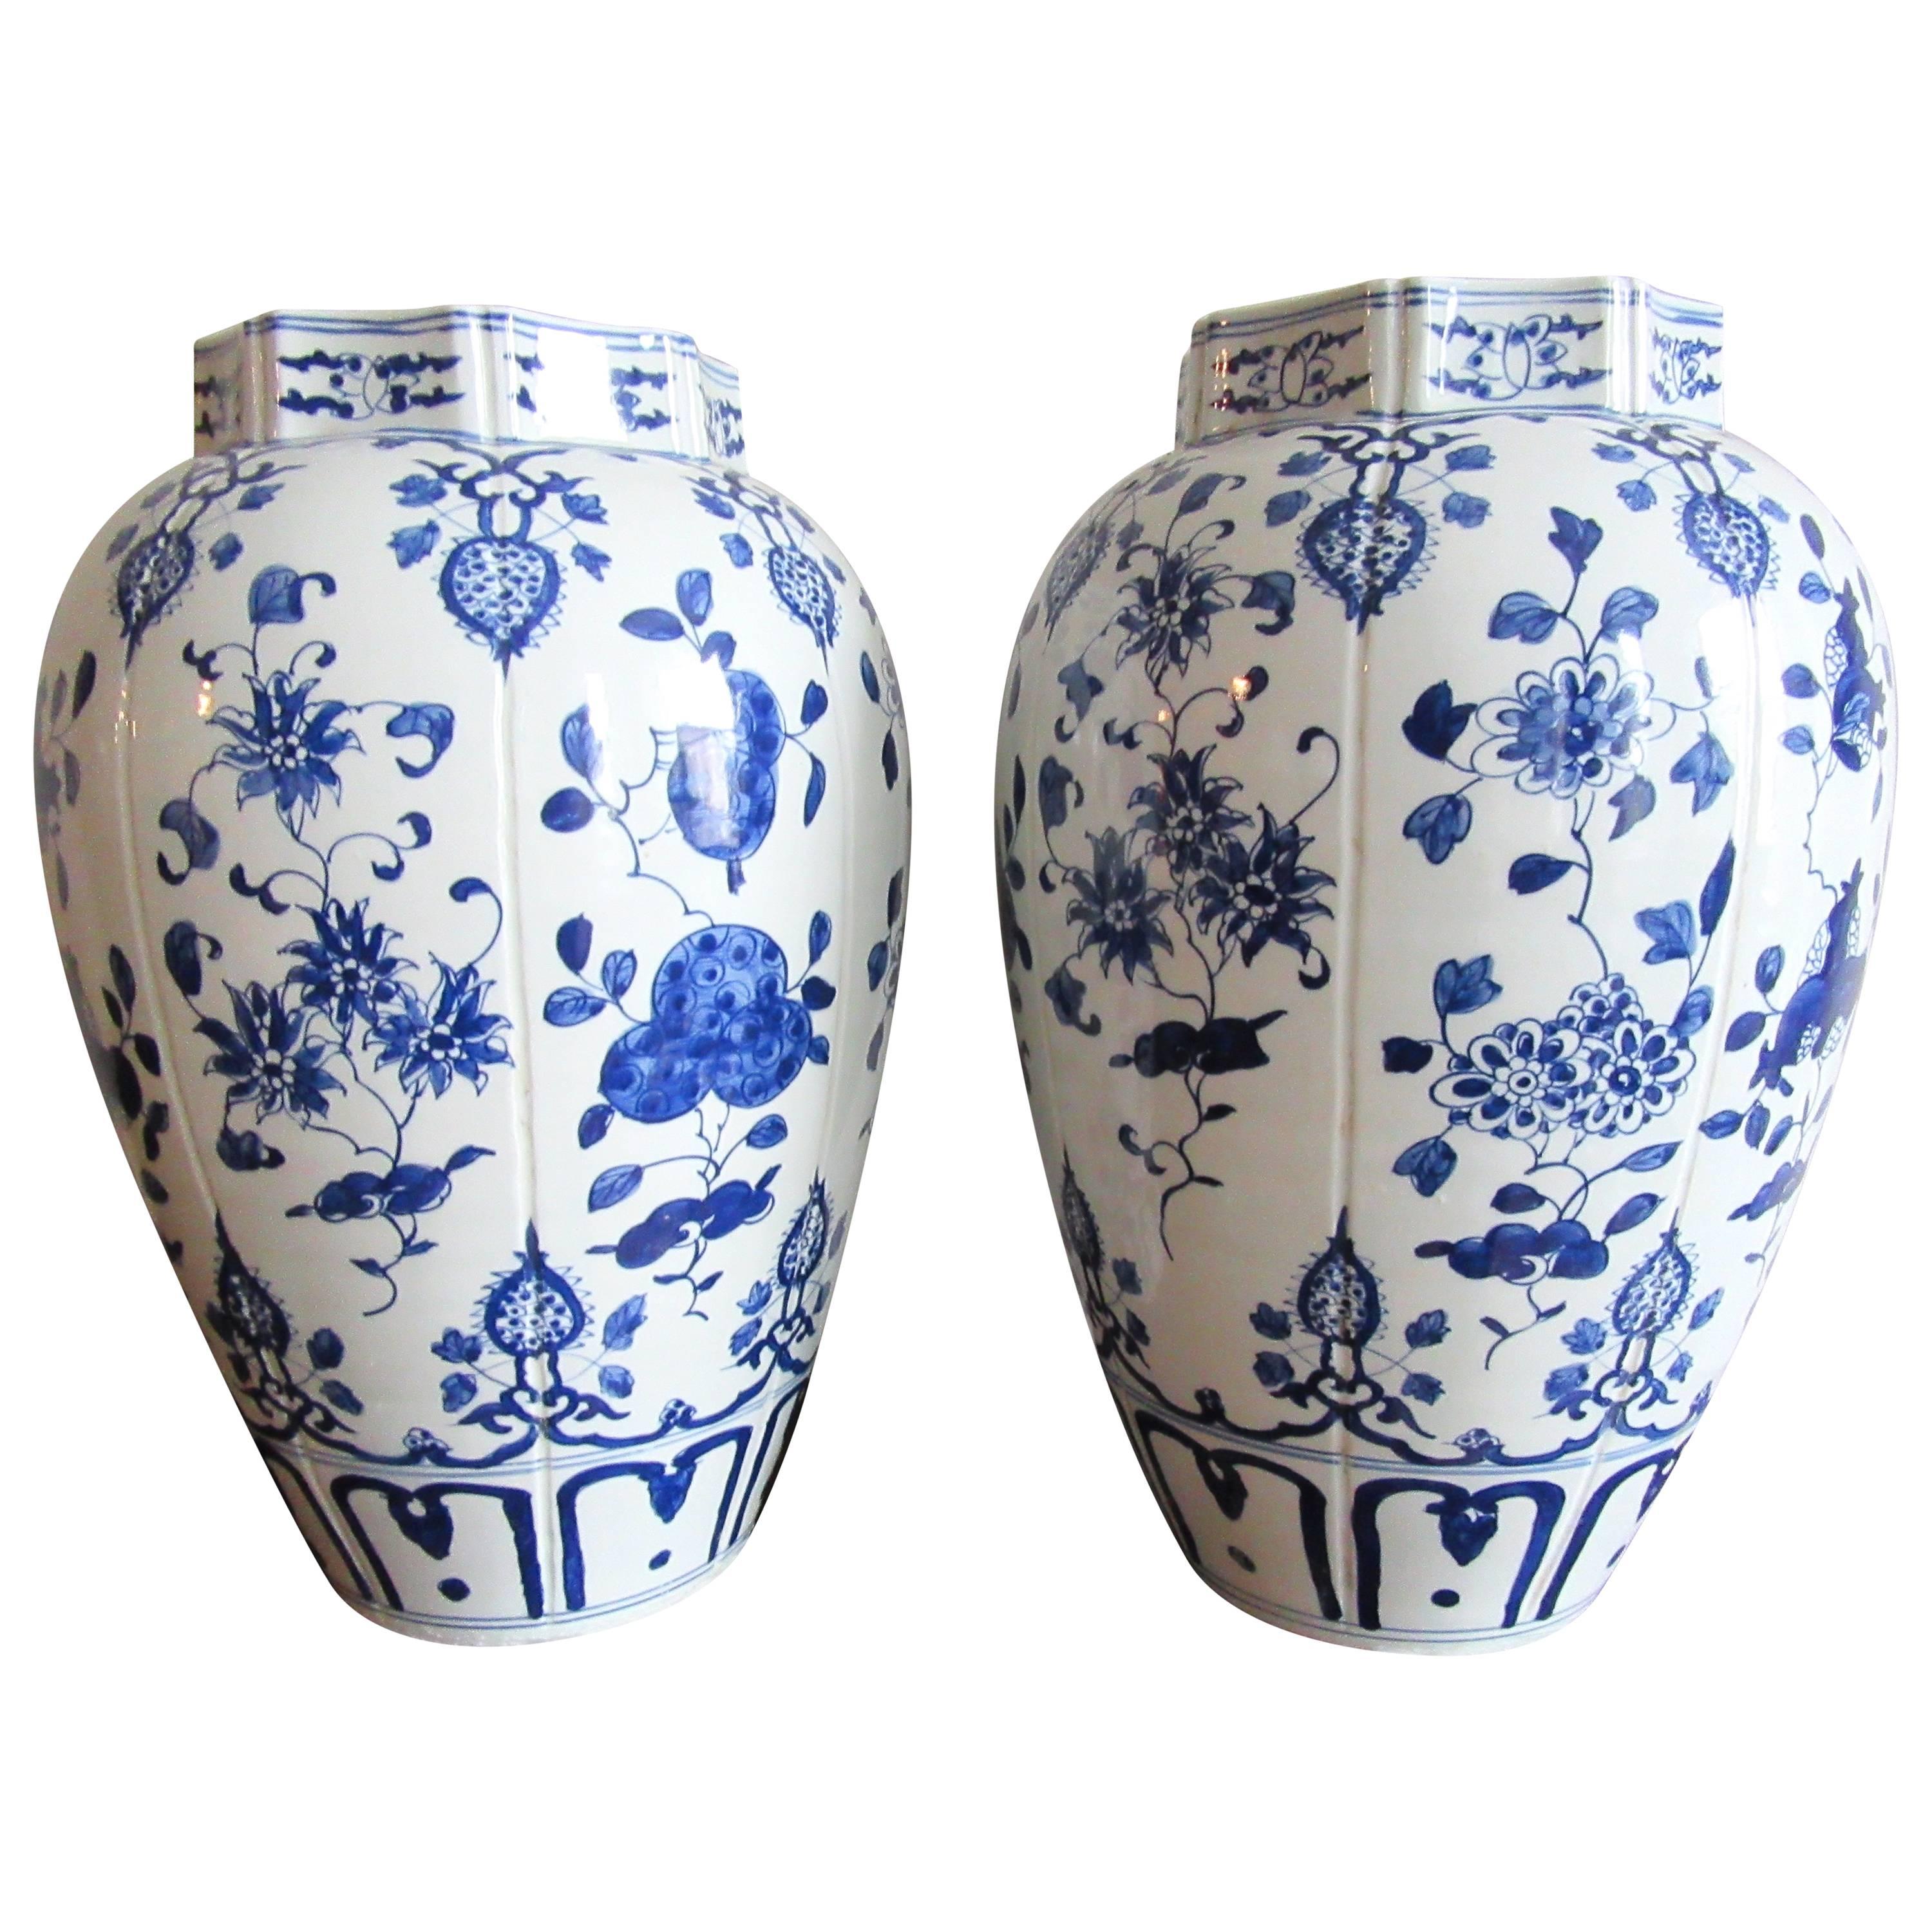 Large Pair of Chinese Blue and White Porcelain Vases